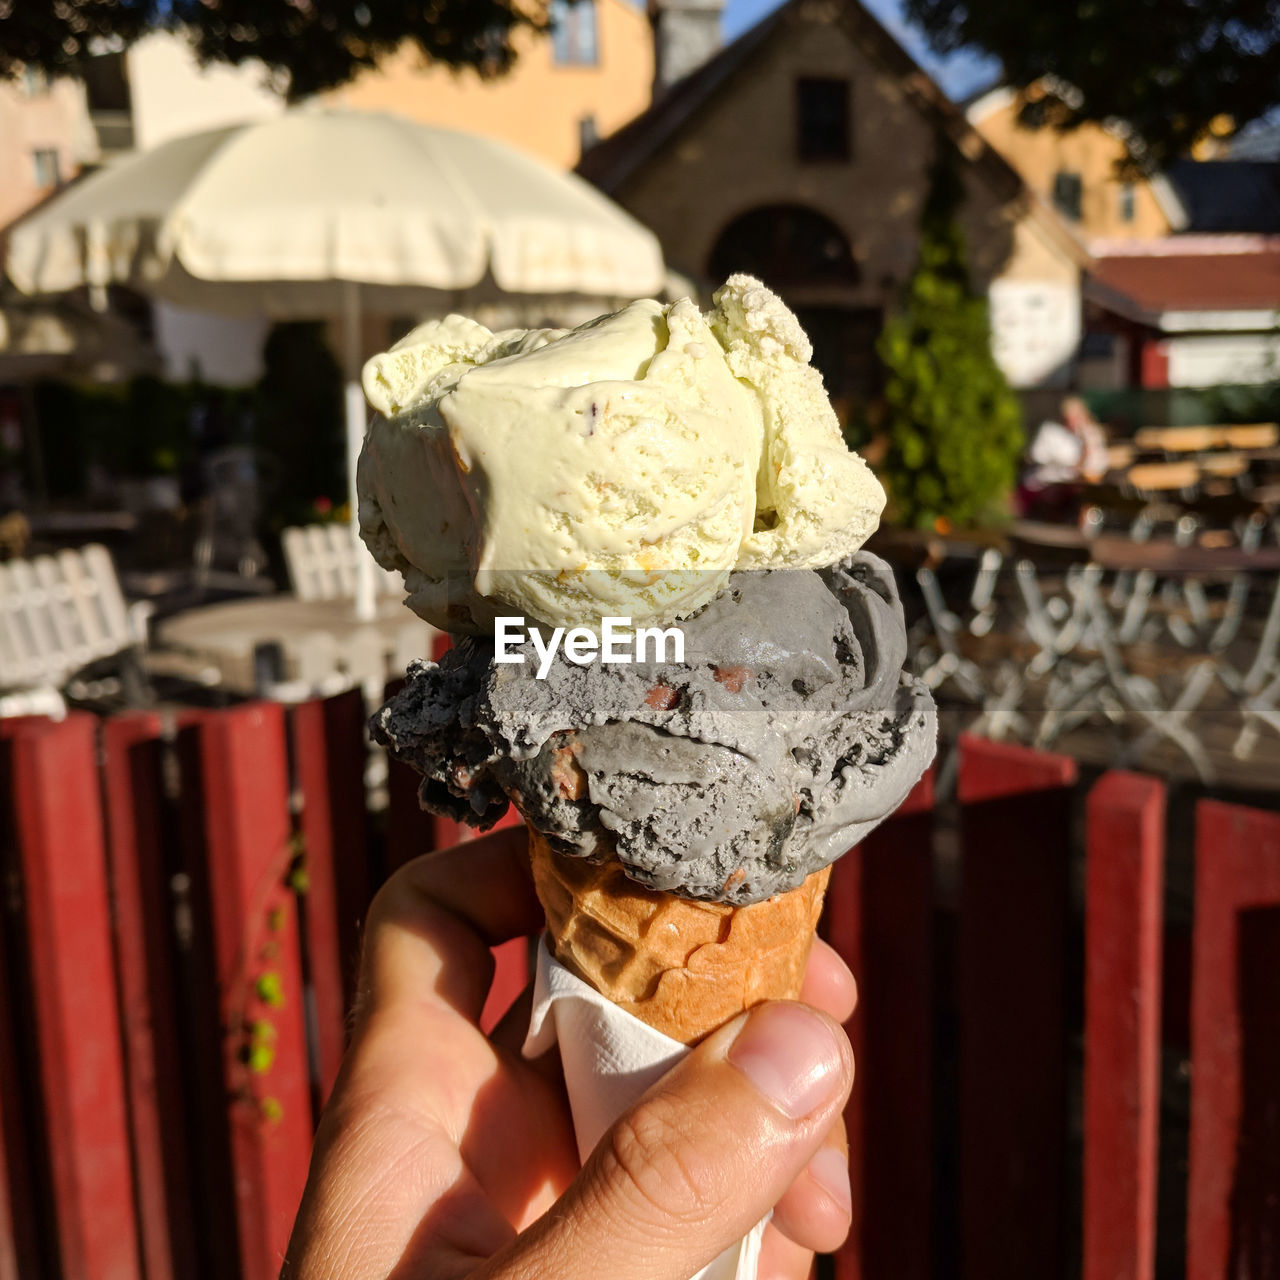 Scoops of grey and yellow ice cream in a cone